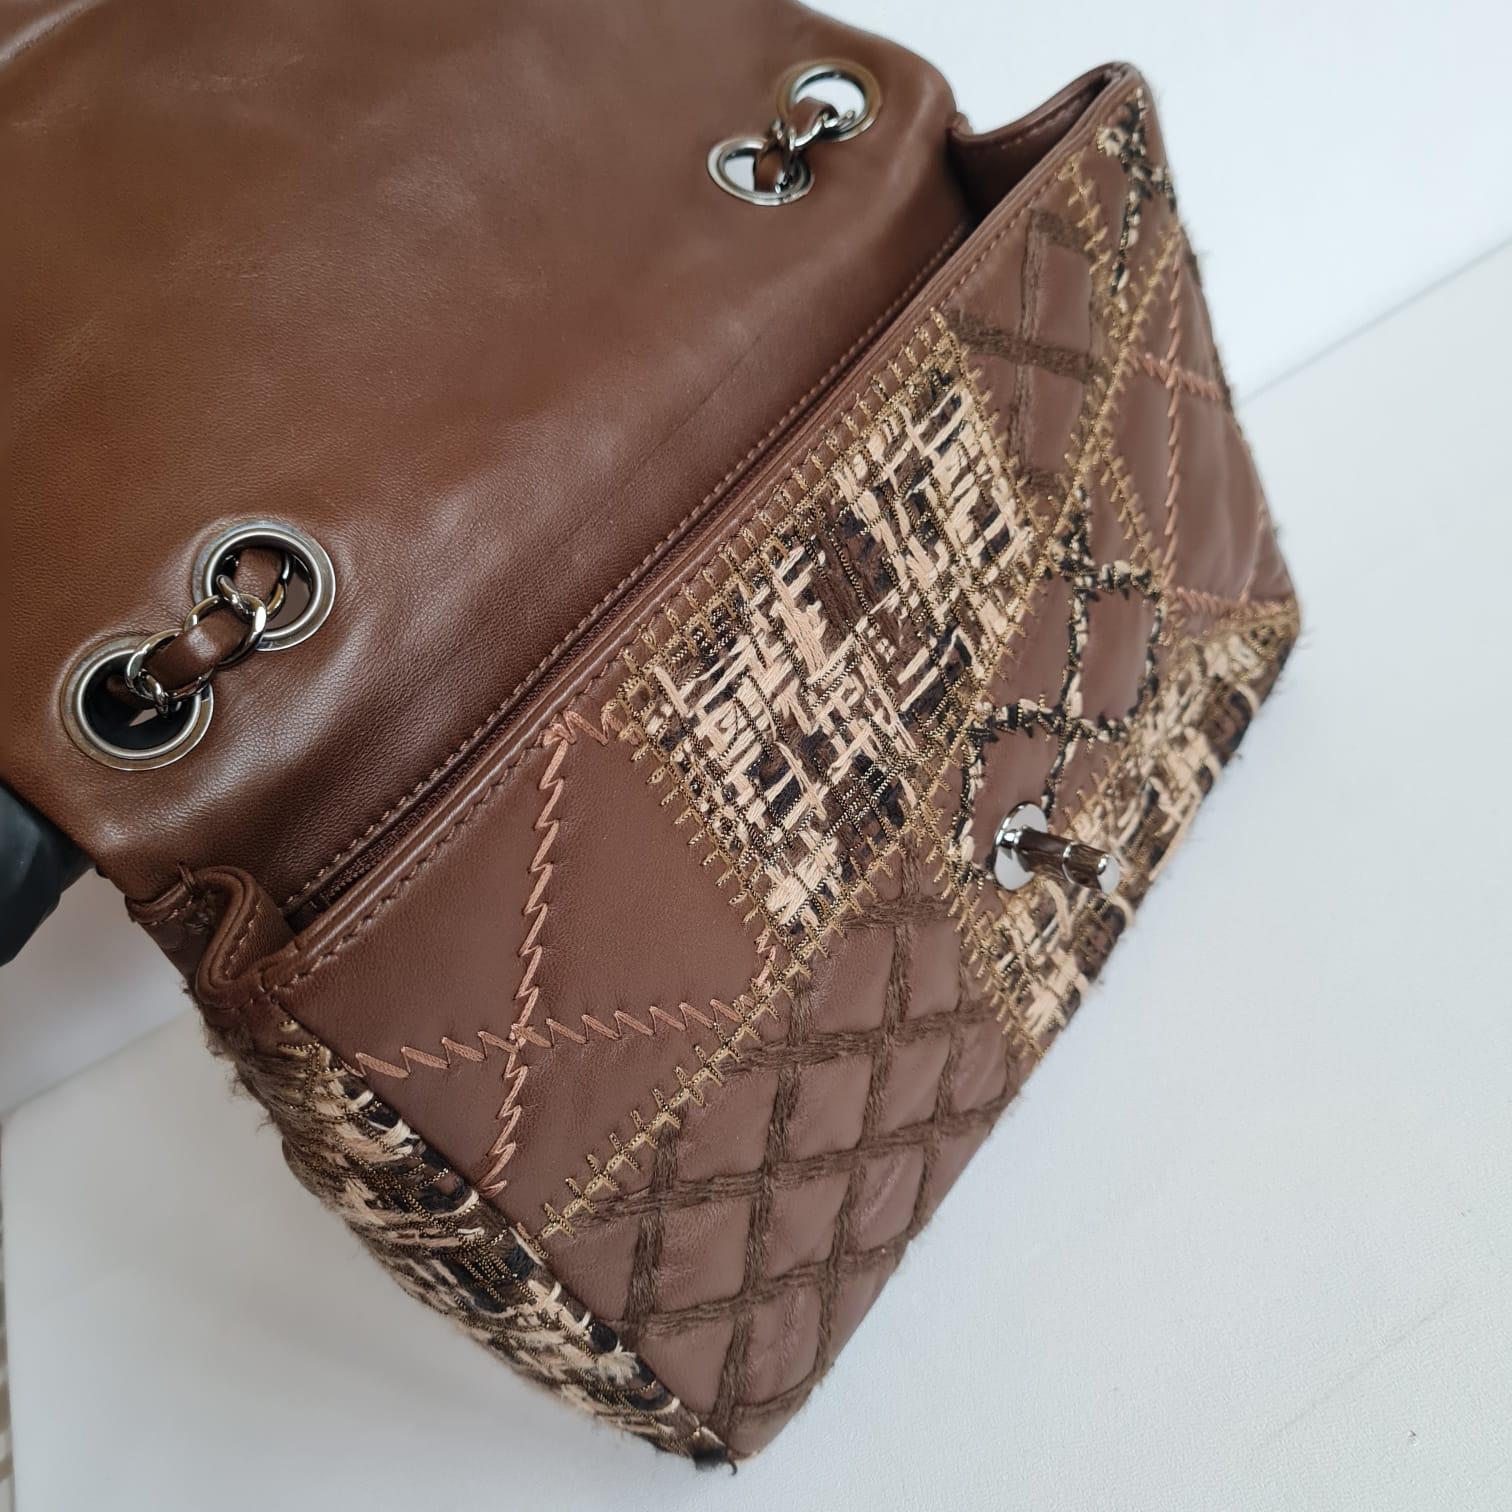 Rare and beautiful brown patchwork flapbag with silver hardware. Overall still in excellent condition. Item is series #15. Comes with its card and dust bag. 